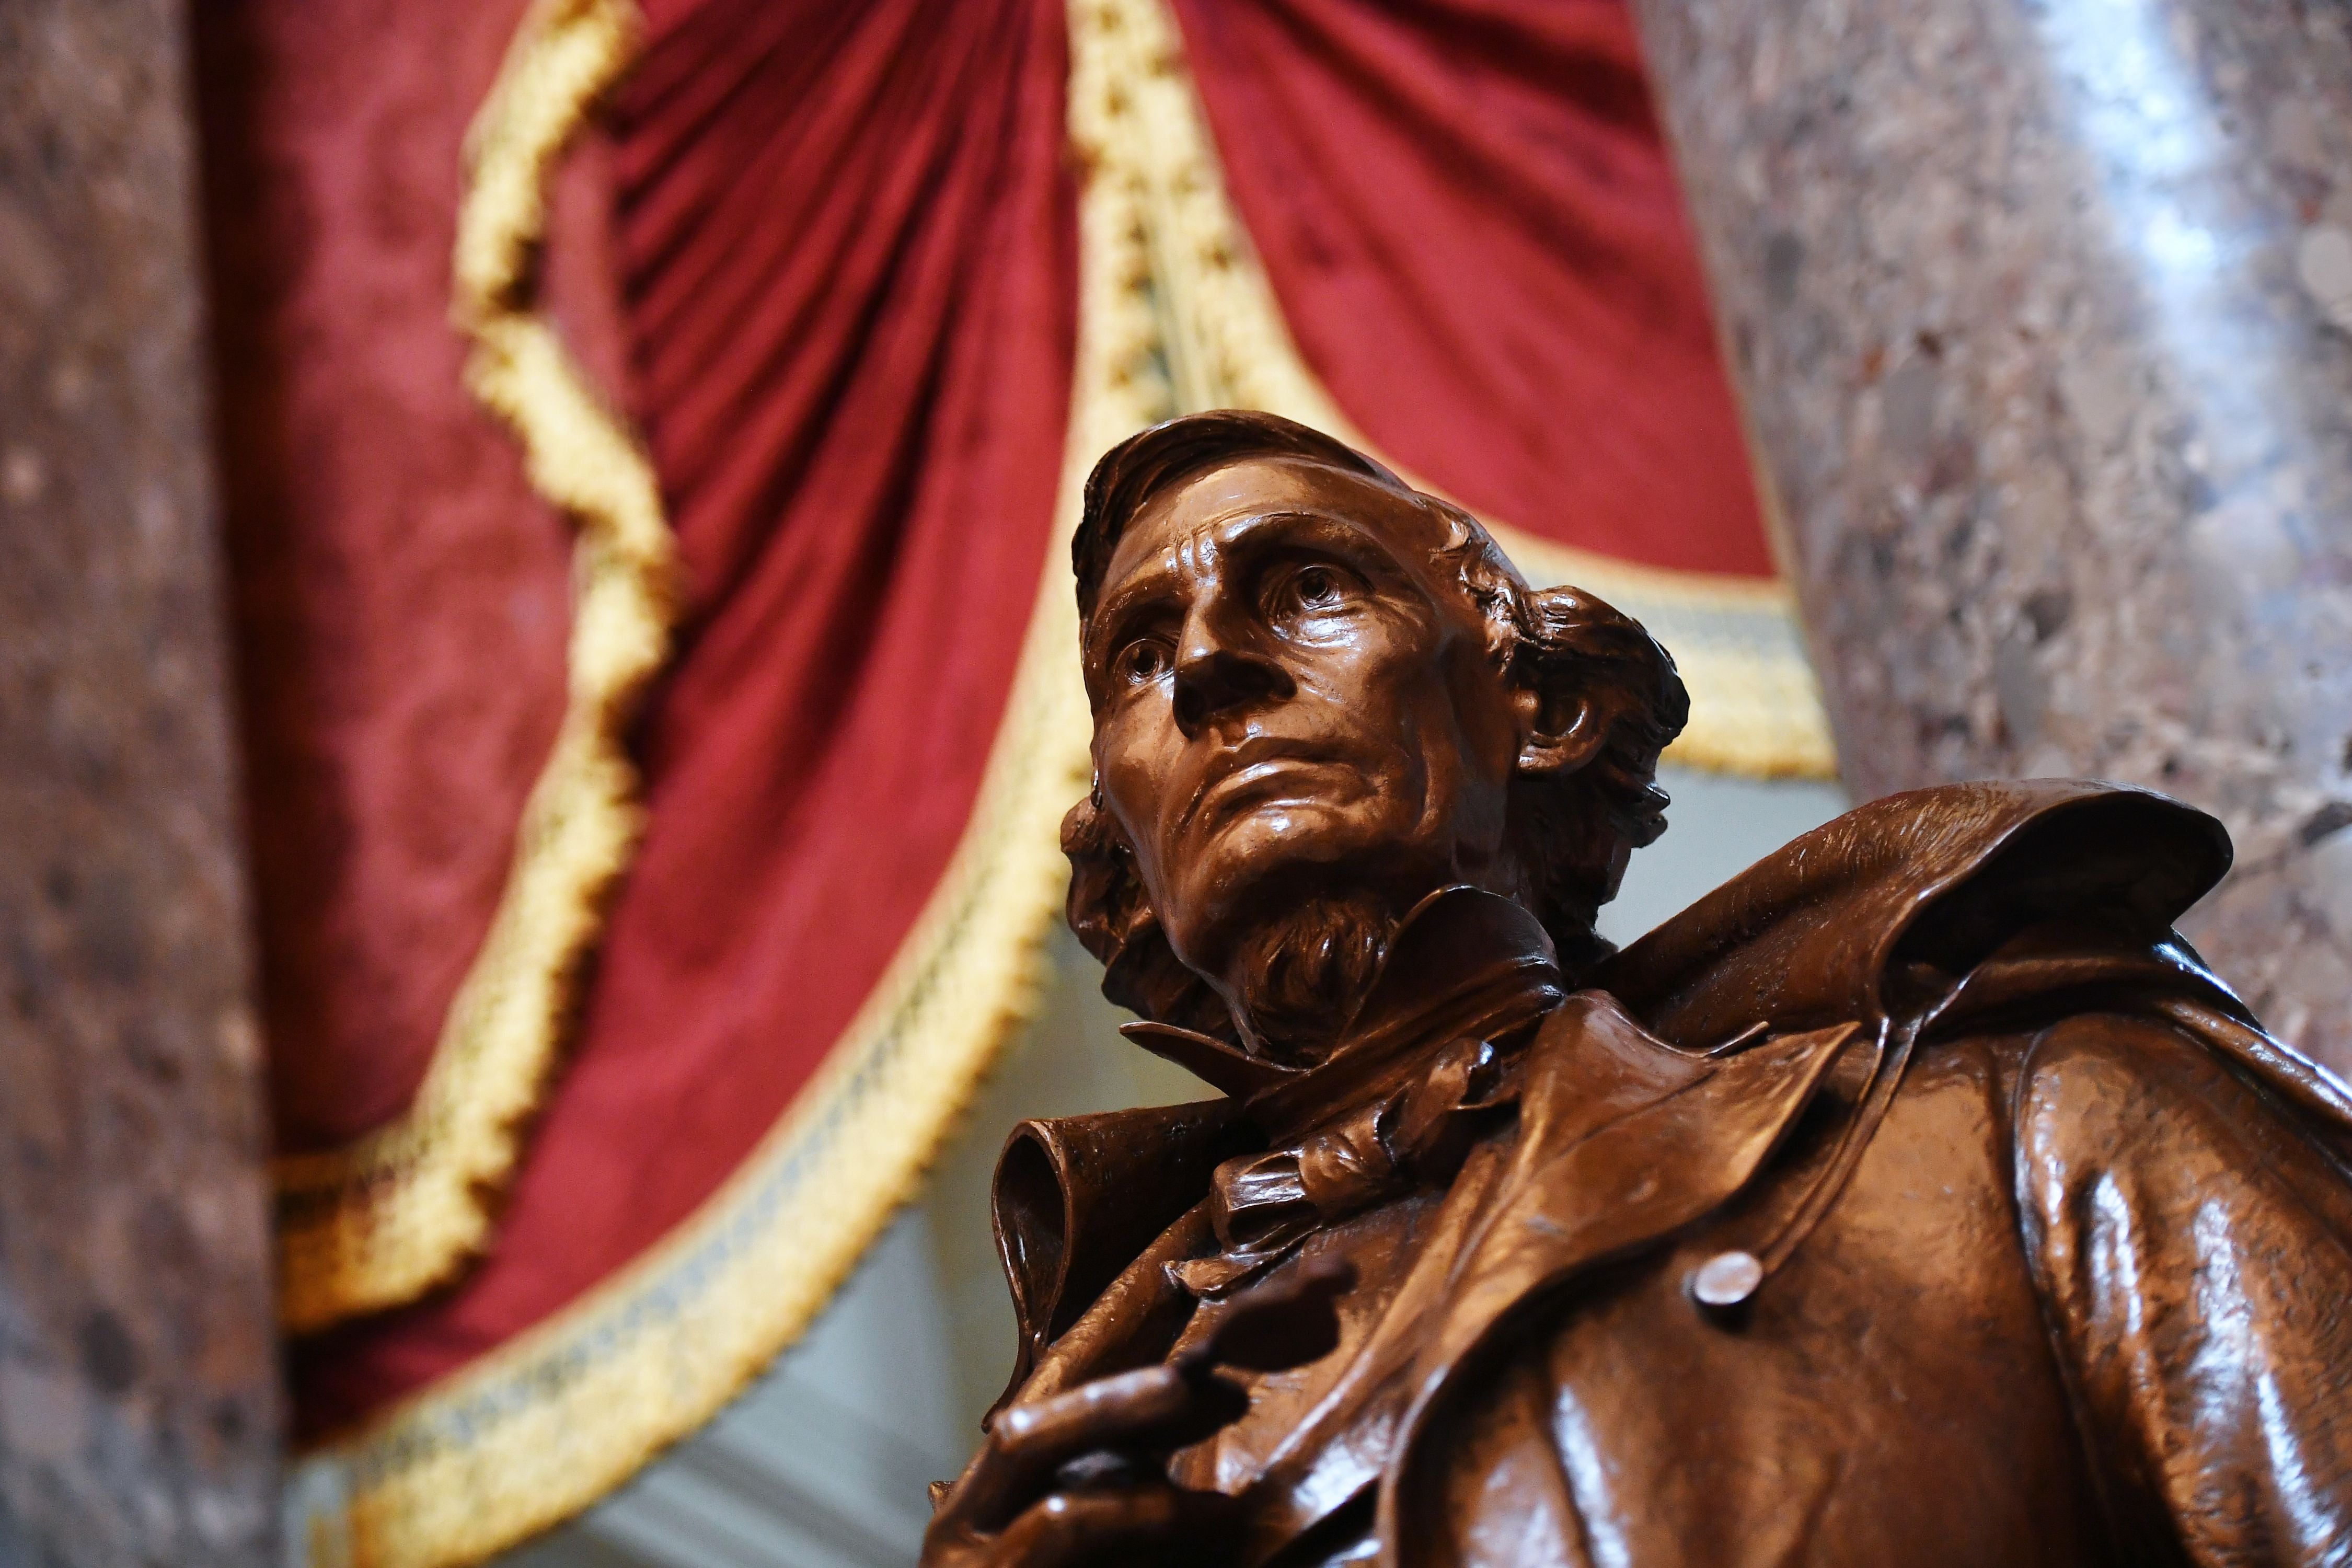 A statue of Confederate president Jefferson Davis in the US Capitol could be removed under legislation targeting statues of Confederate leaders and white supremacists.